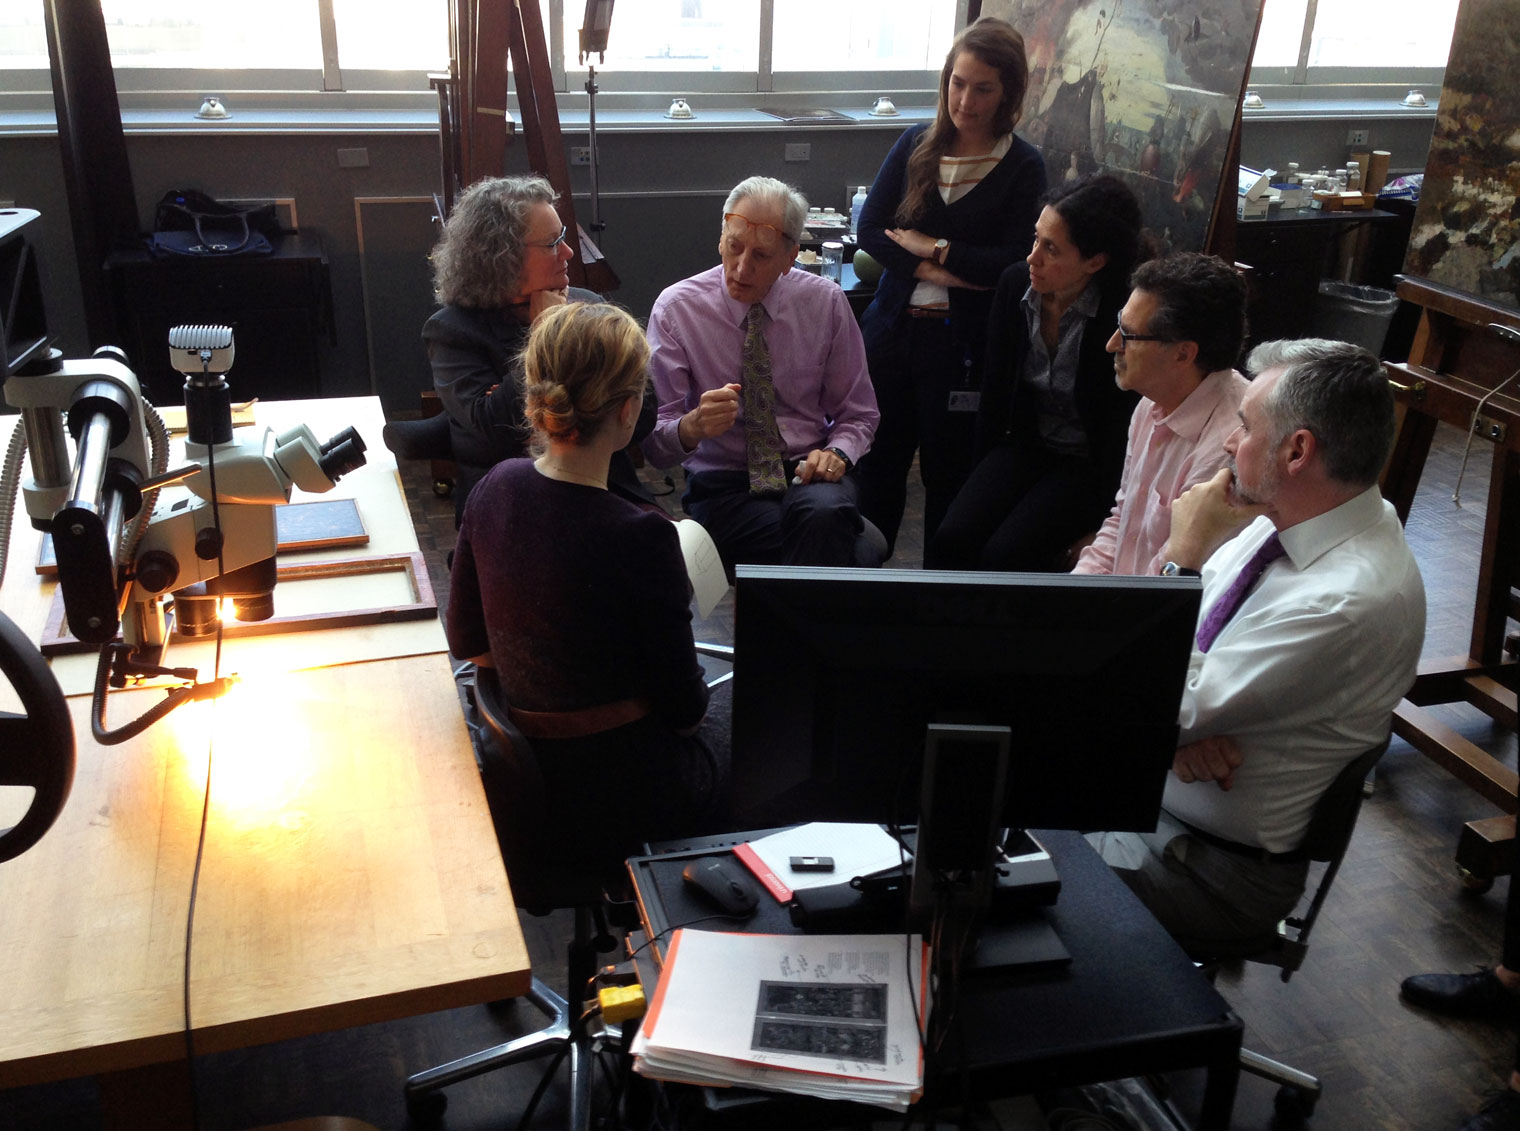 A group of art experts hold a discussion in a brightly lit conservation studio